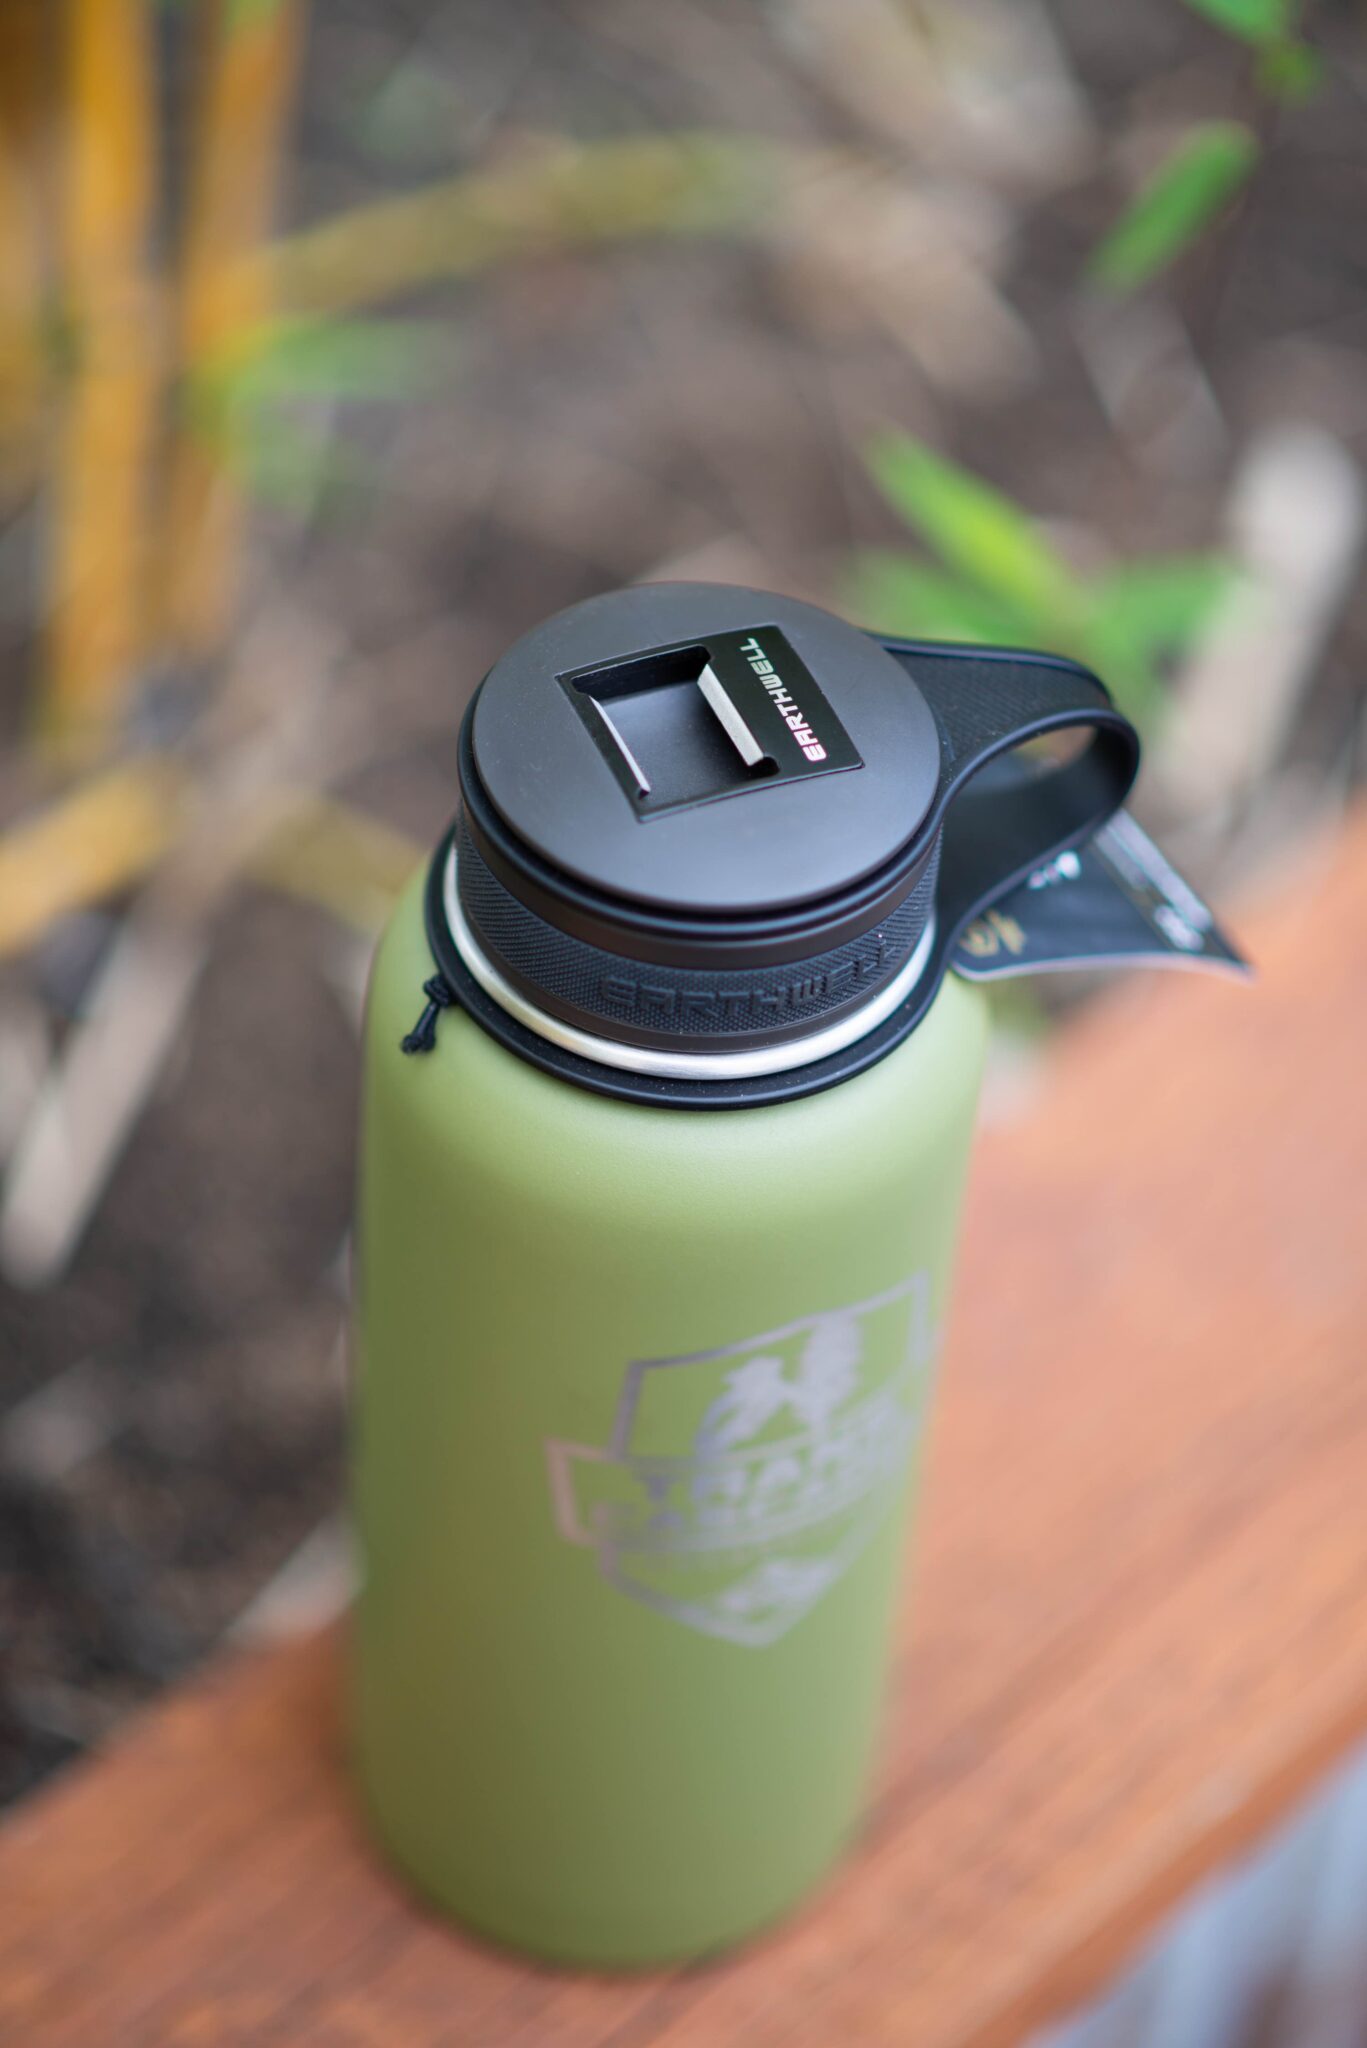 https://www.transcascadiaexcursions.com/wp-content/uploads/2021/08/TCE_Product-Water-Bottle_Small_Green-Top-1-scaled.jpeg